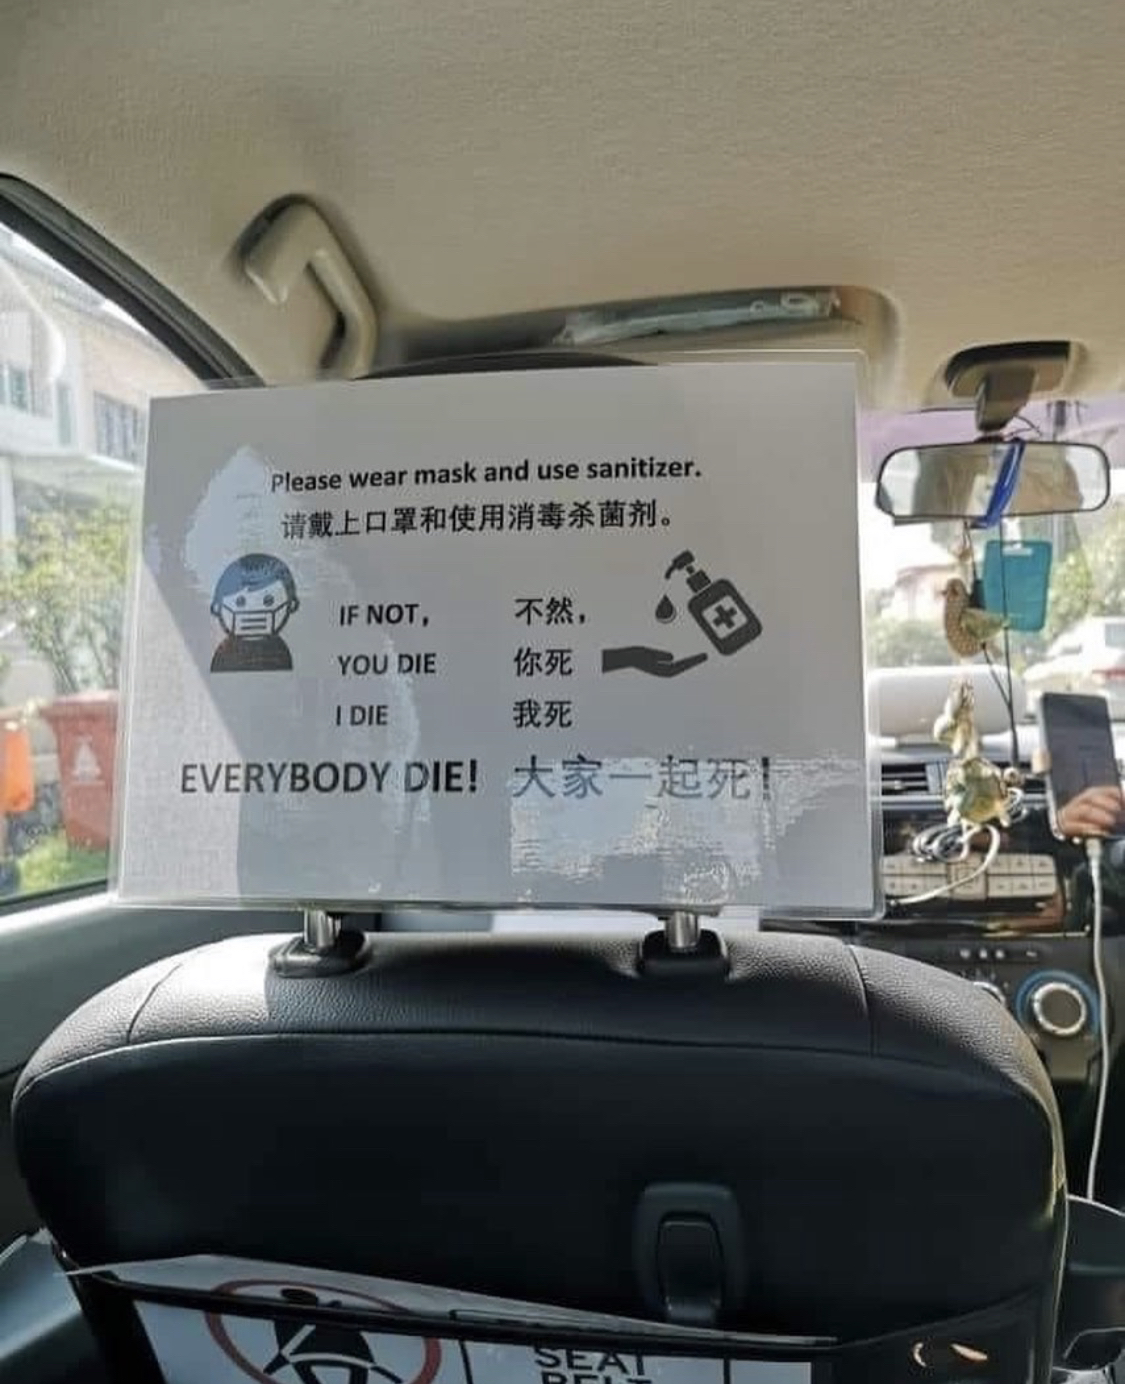 Taxi drivers are taking C-19 pretty seriously.